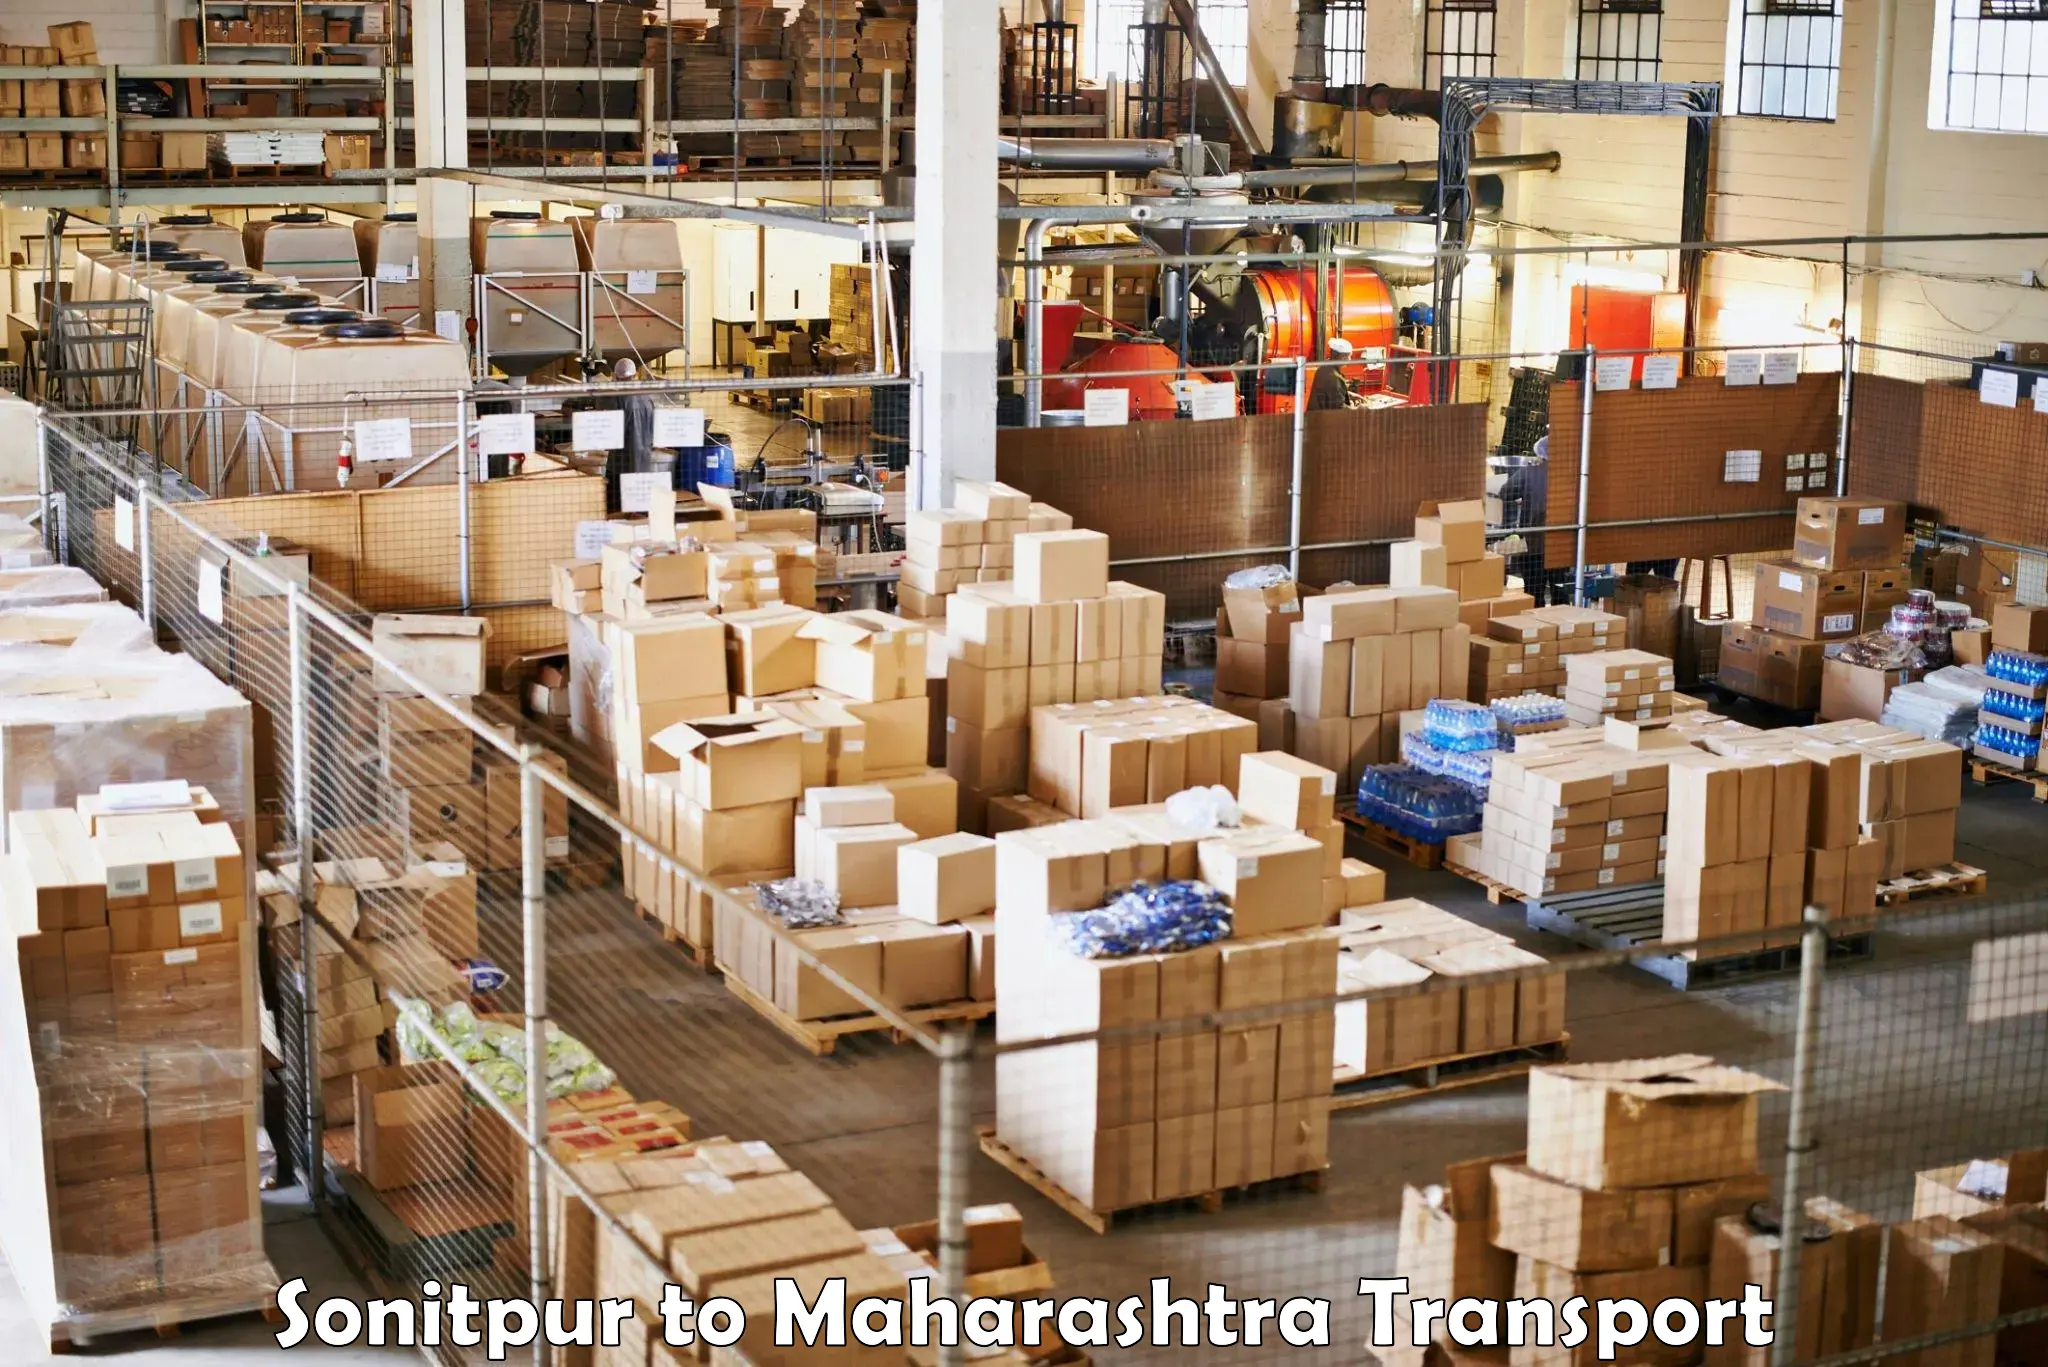 Commercial transport service Sonitpur to Alephata